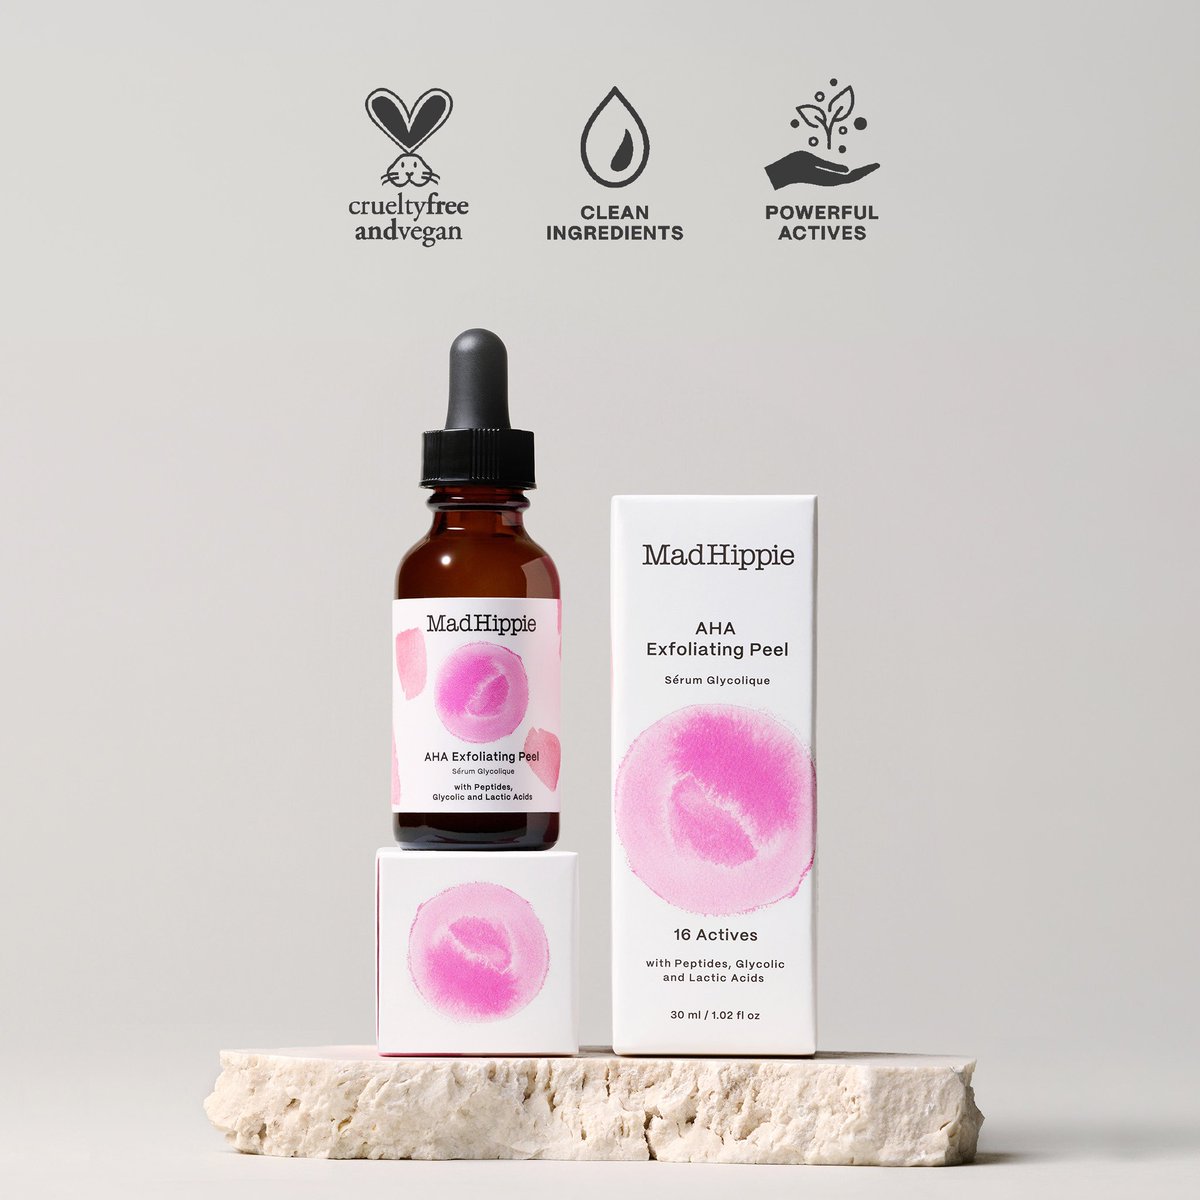 Grab your Mad Hippie products at #CareFreeBlackGirl cookout next Saturday.  
The AHA Exfoliating Peel is perfect for shedding dullness and discoloration revealing a brighter, smoother looking skin. 

#pinkwednesday #skincare